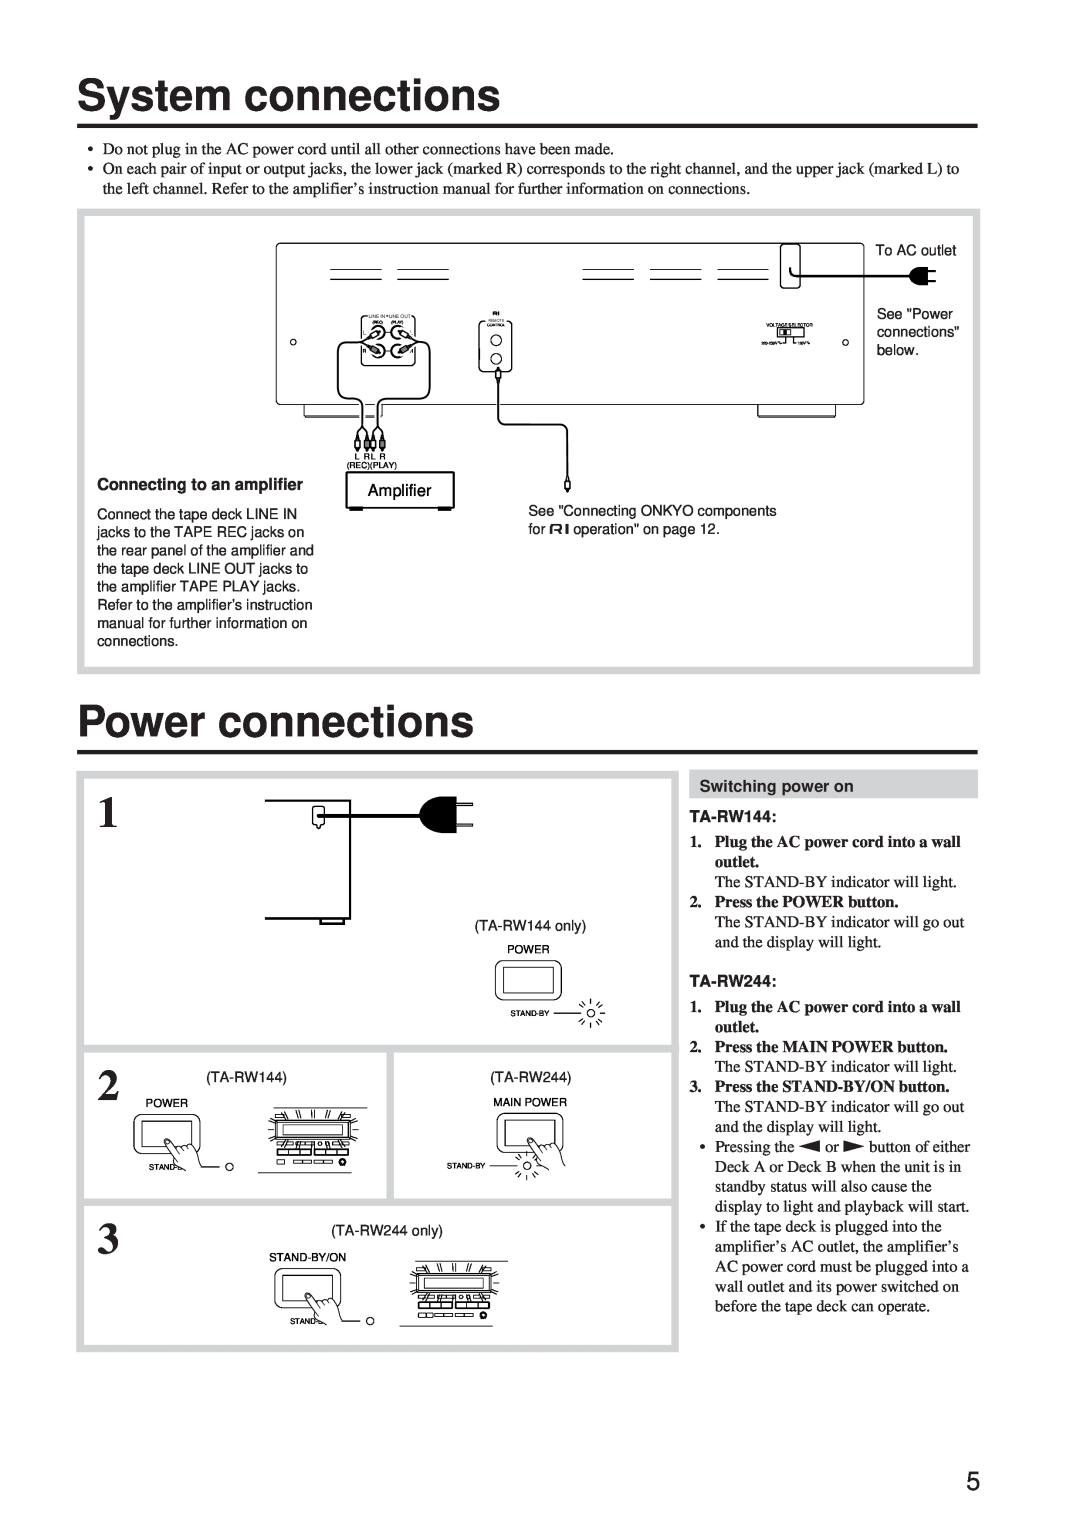 Onkyo TA-RW244/144 System connections, Power connections, Connecting to an amplifier, Switching power on TA-RW144 